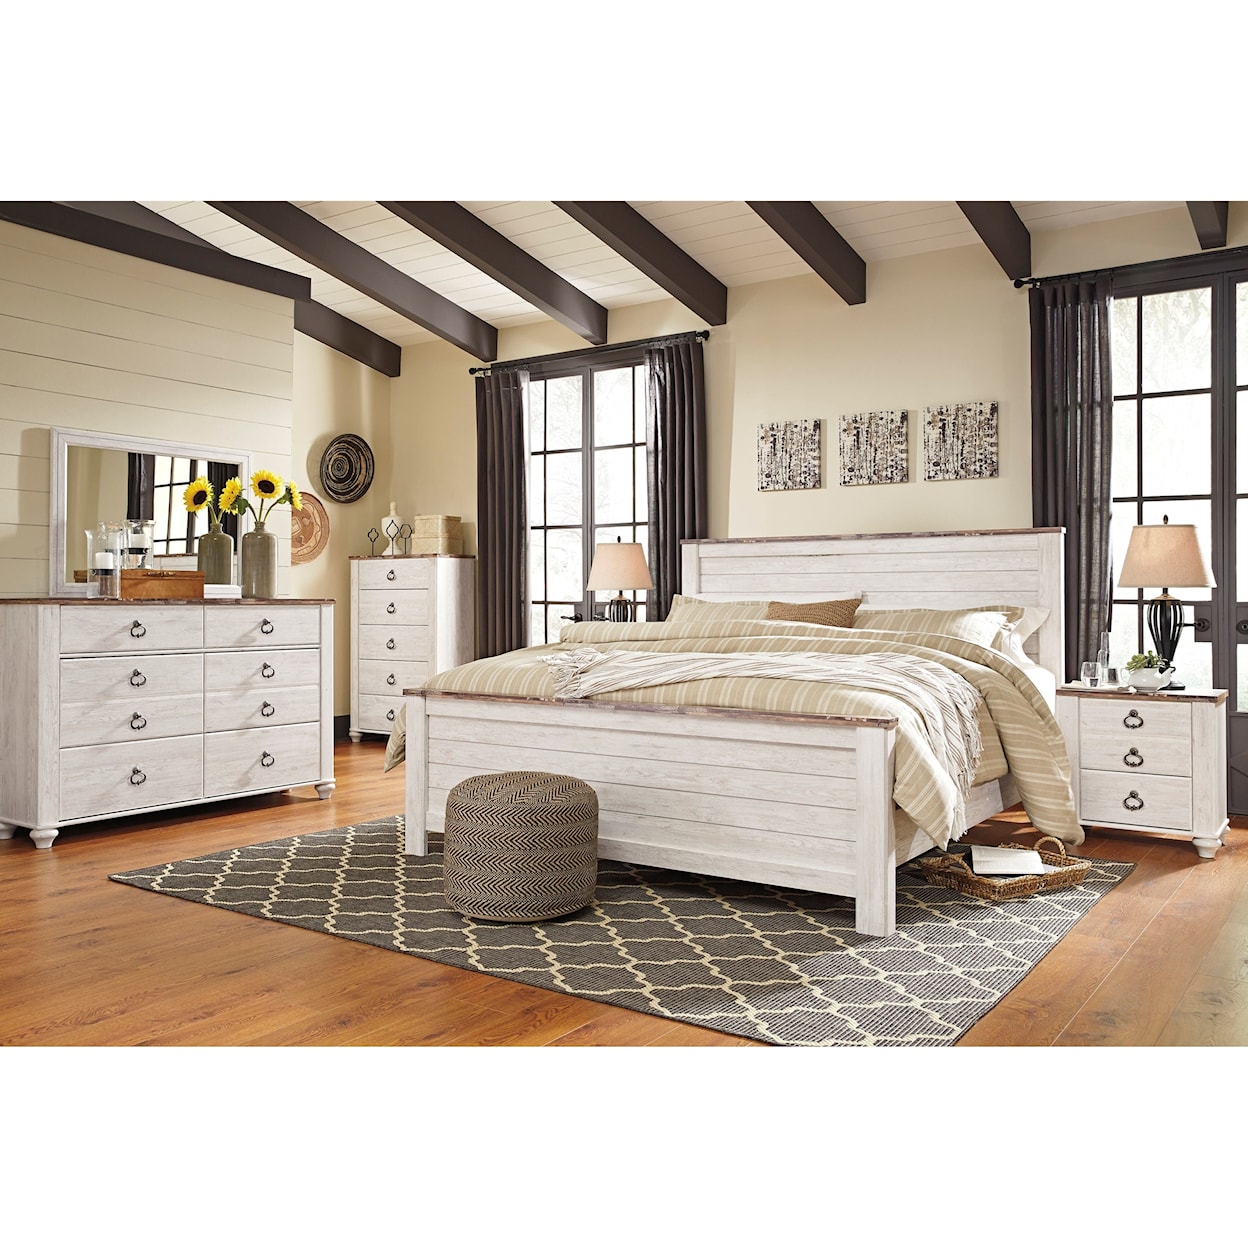 Signature Design by Ashley Willowton California King Bedroom Group